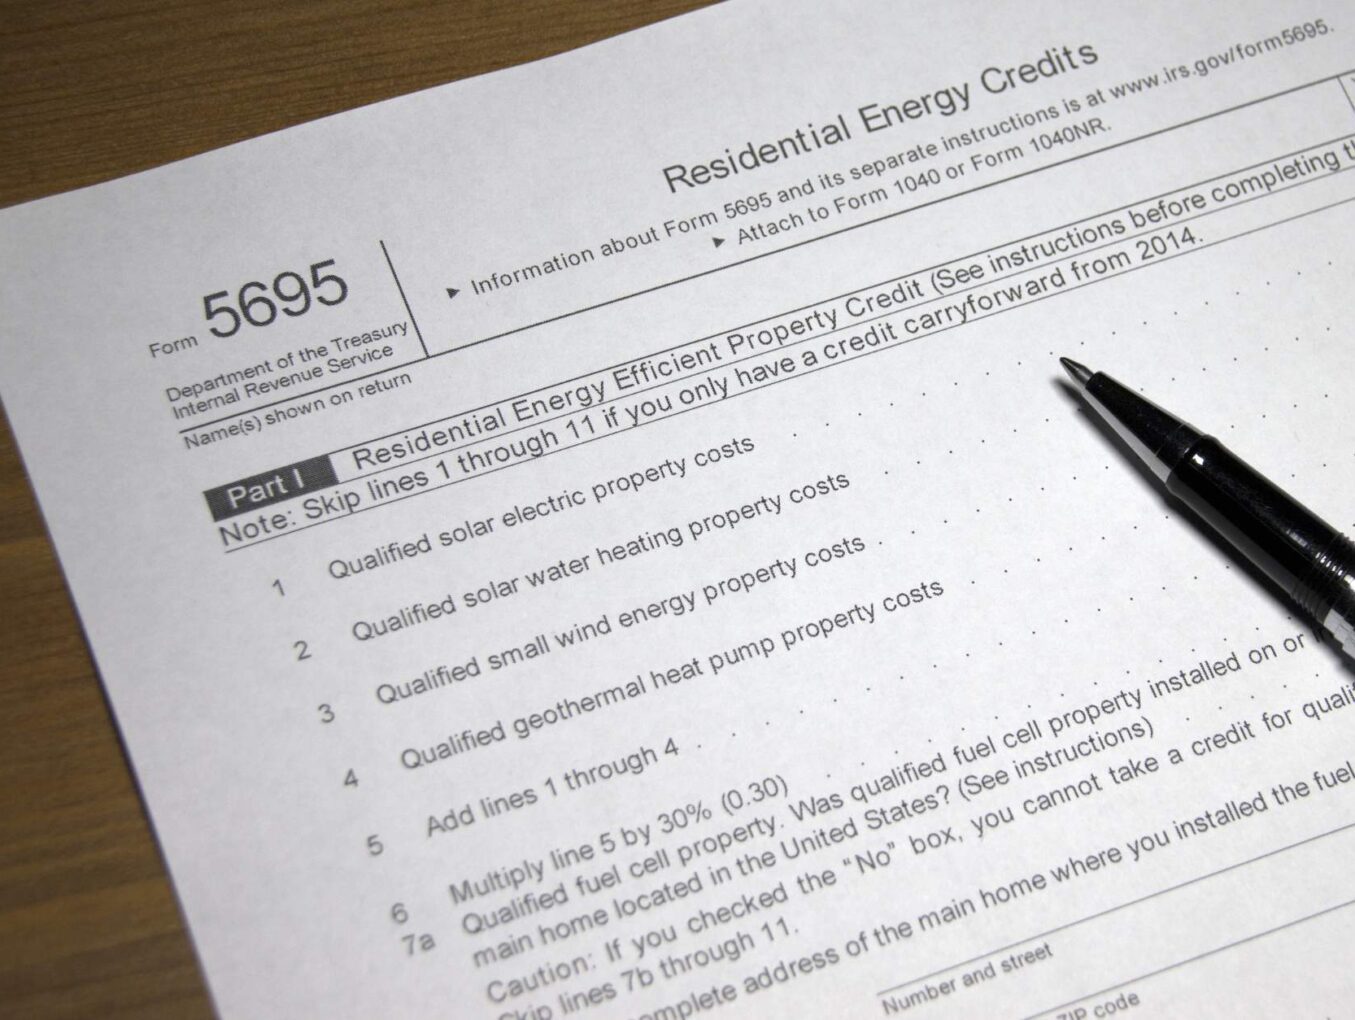 Residential Energy Credit: How Energy-Saving Home Improvements Will Lower Your IRS Taxes